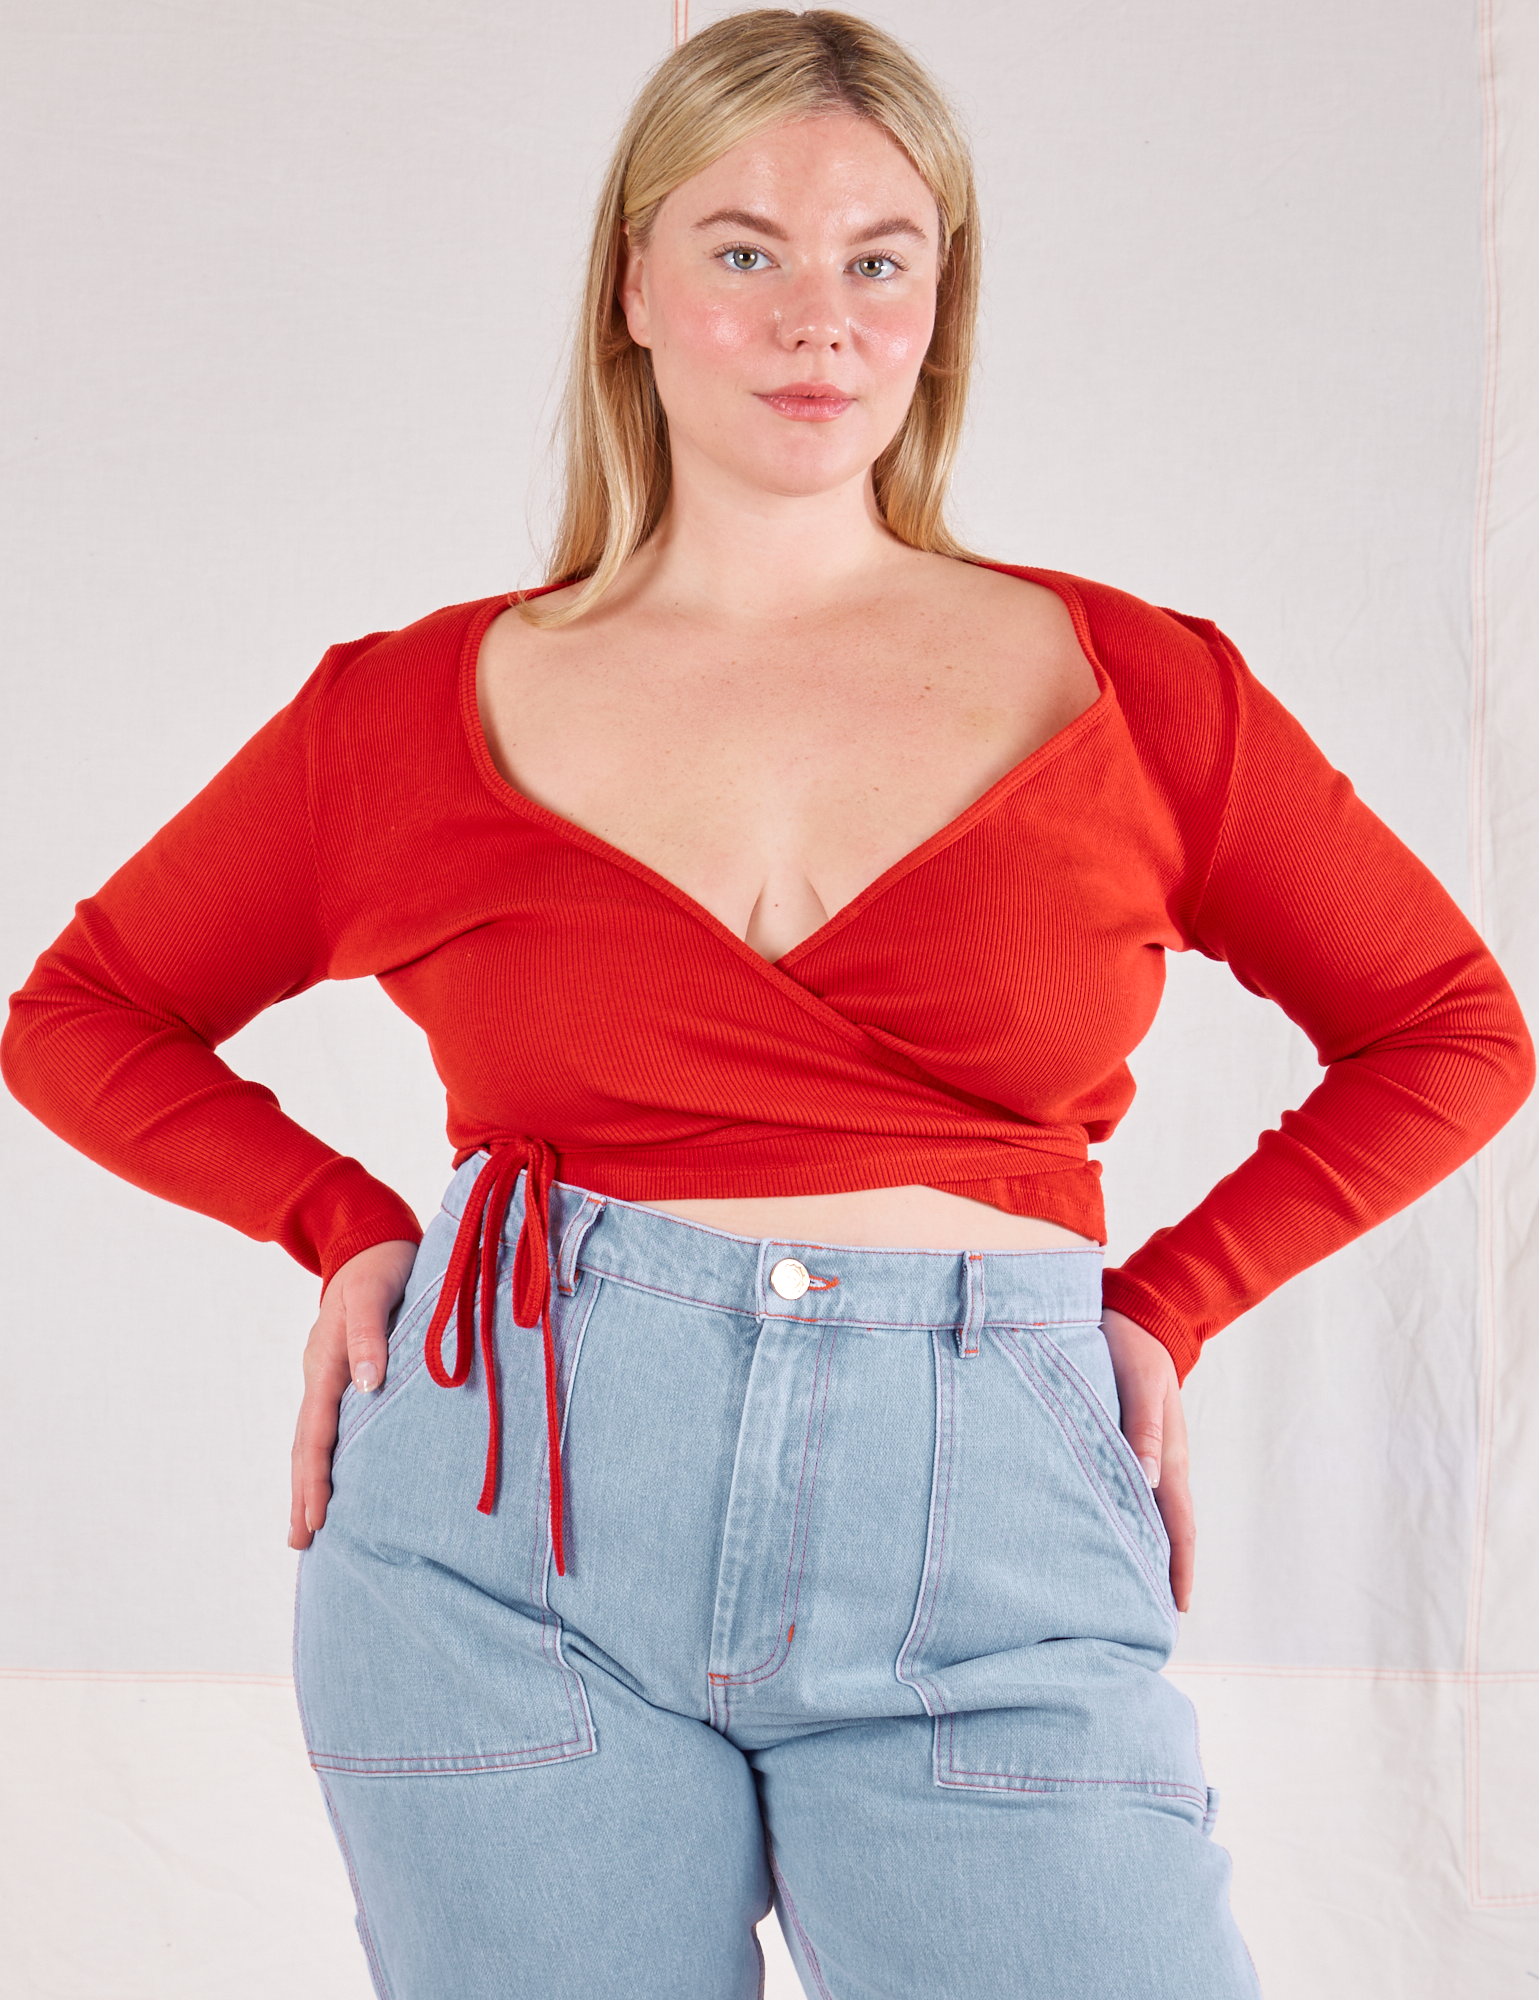 Lish is wearing Wrap Top in Mustang Red and light wash Carpenter Jeans